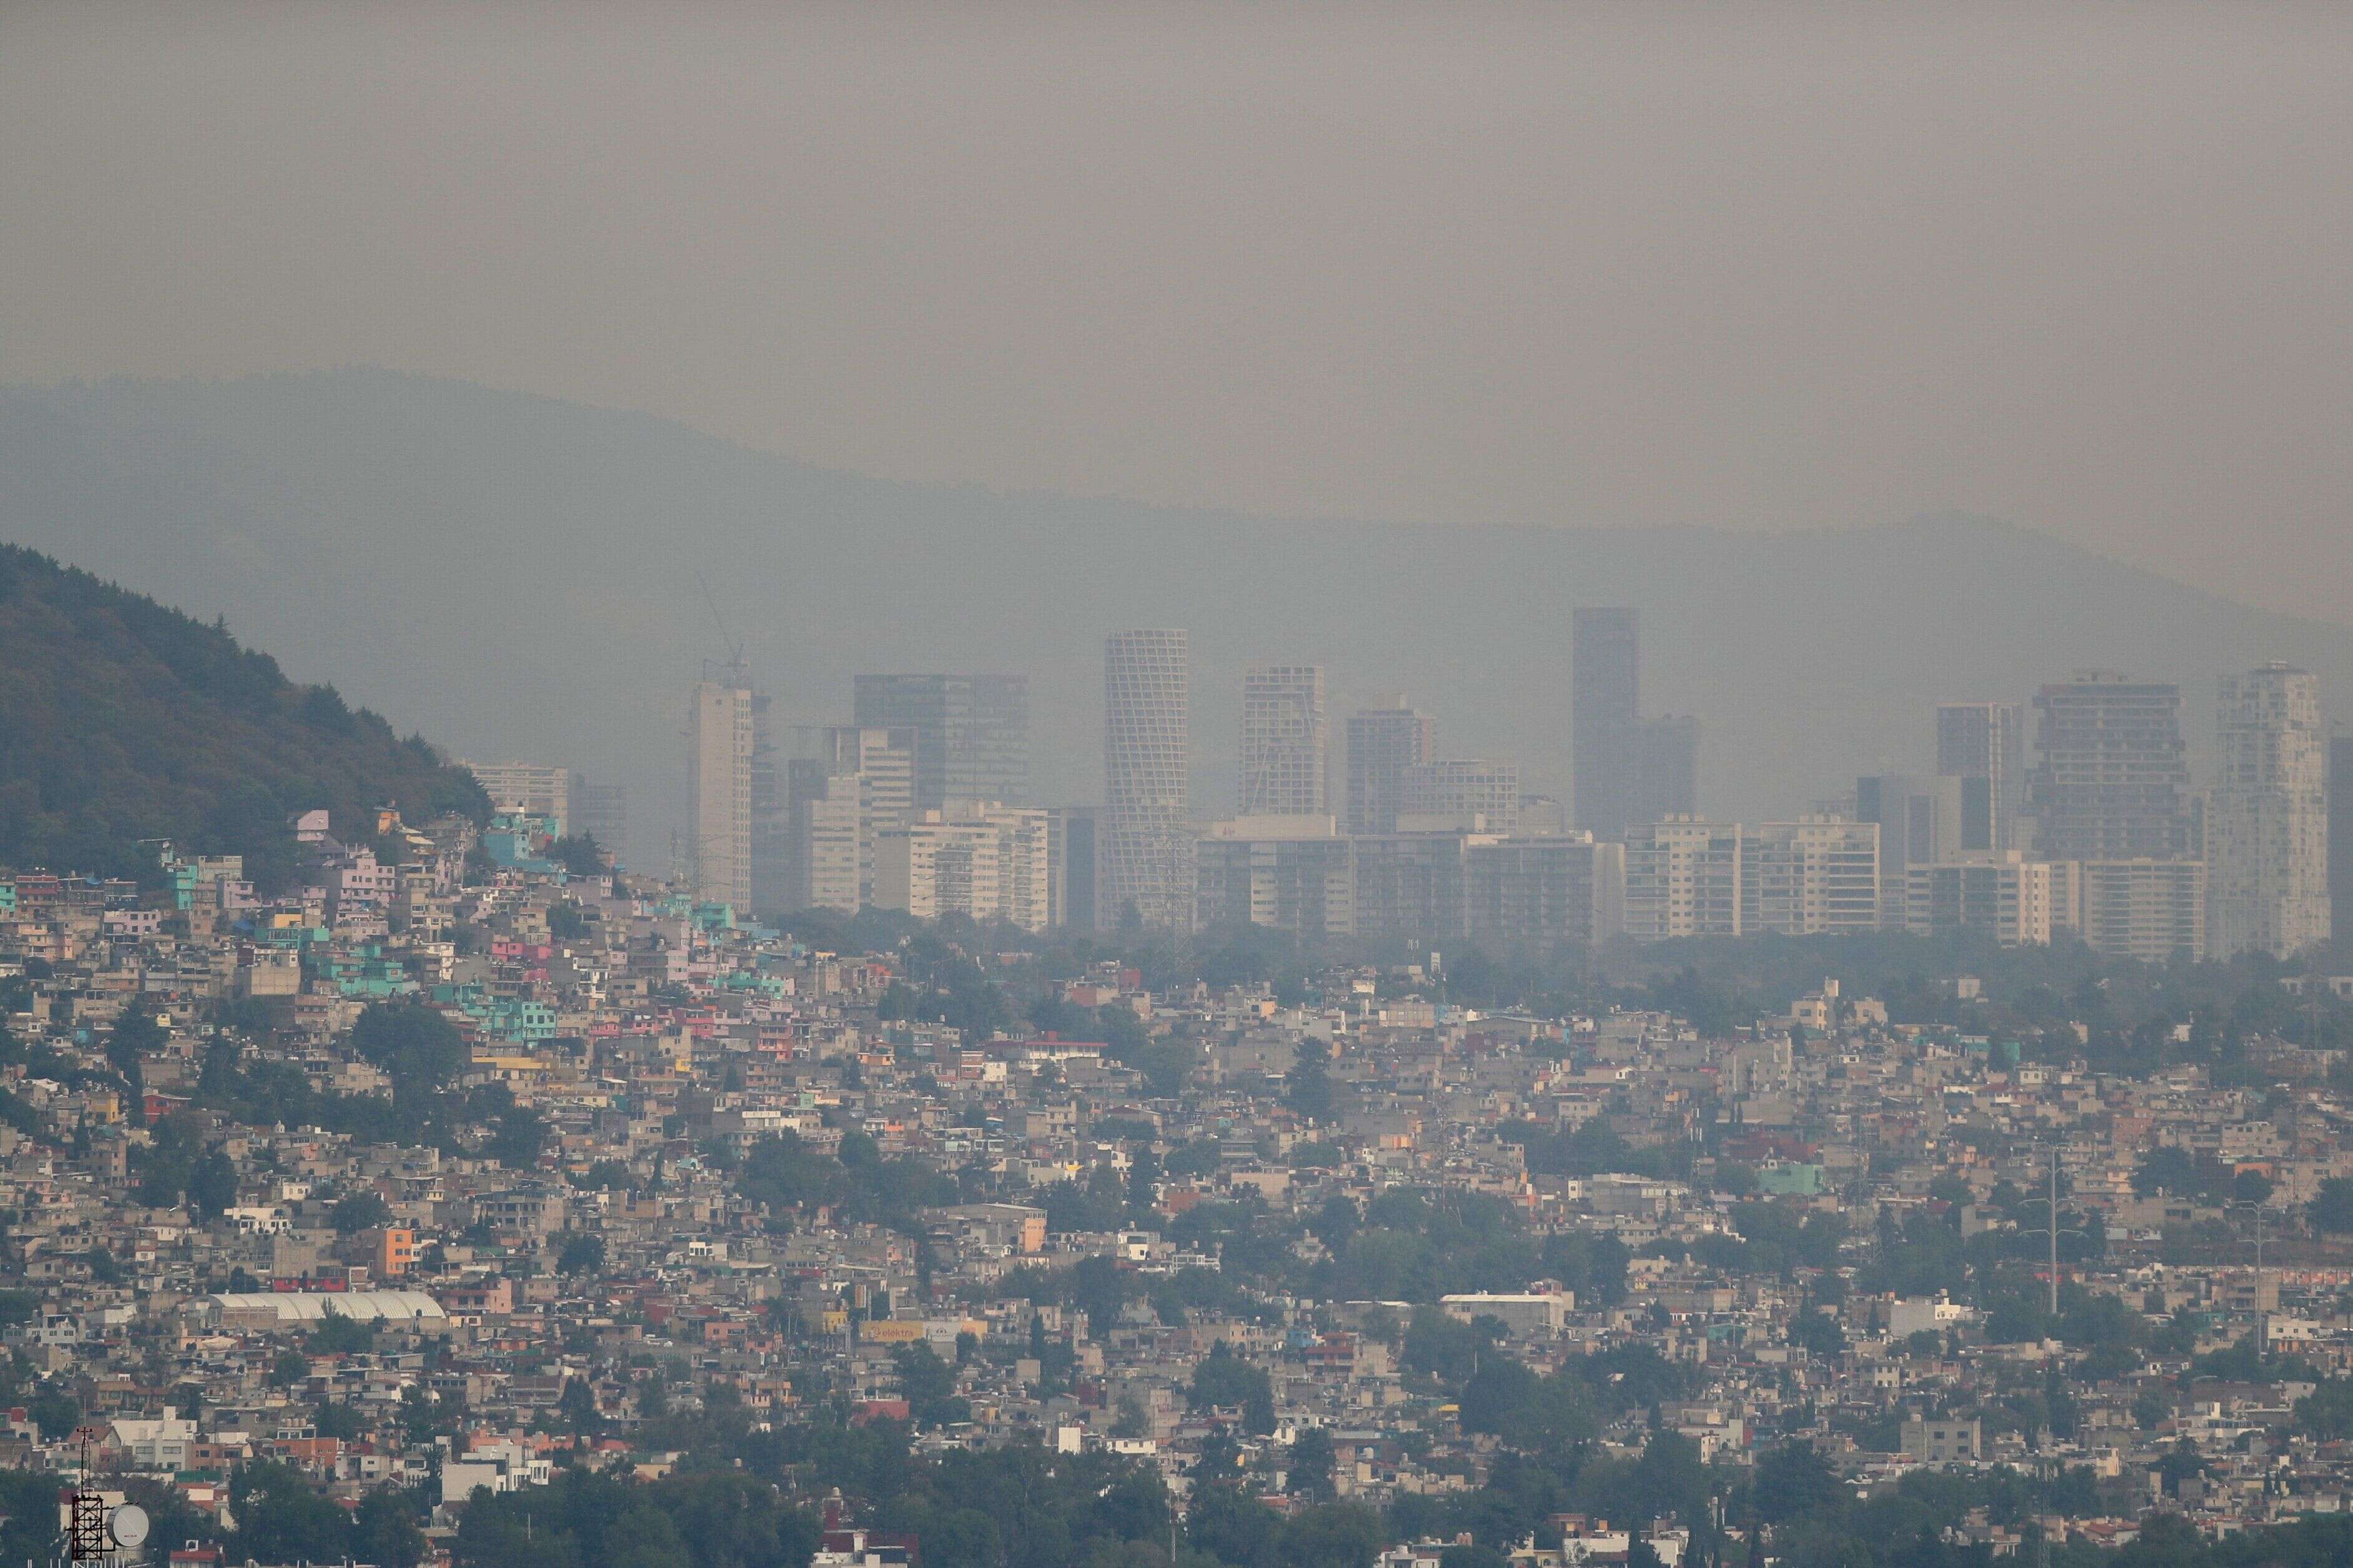 Buildings and houses stand shrouded in smog as authorities ordered traffic restrictions due to air pollution in Mexico City, Mexico, on May 3, 2022. REUTERS/Edgard Garrido